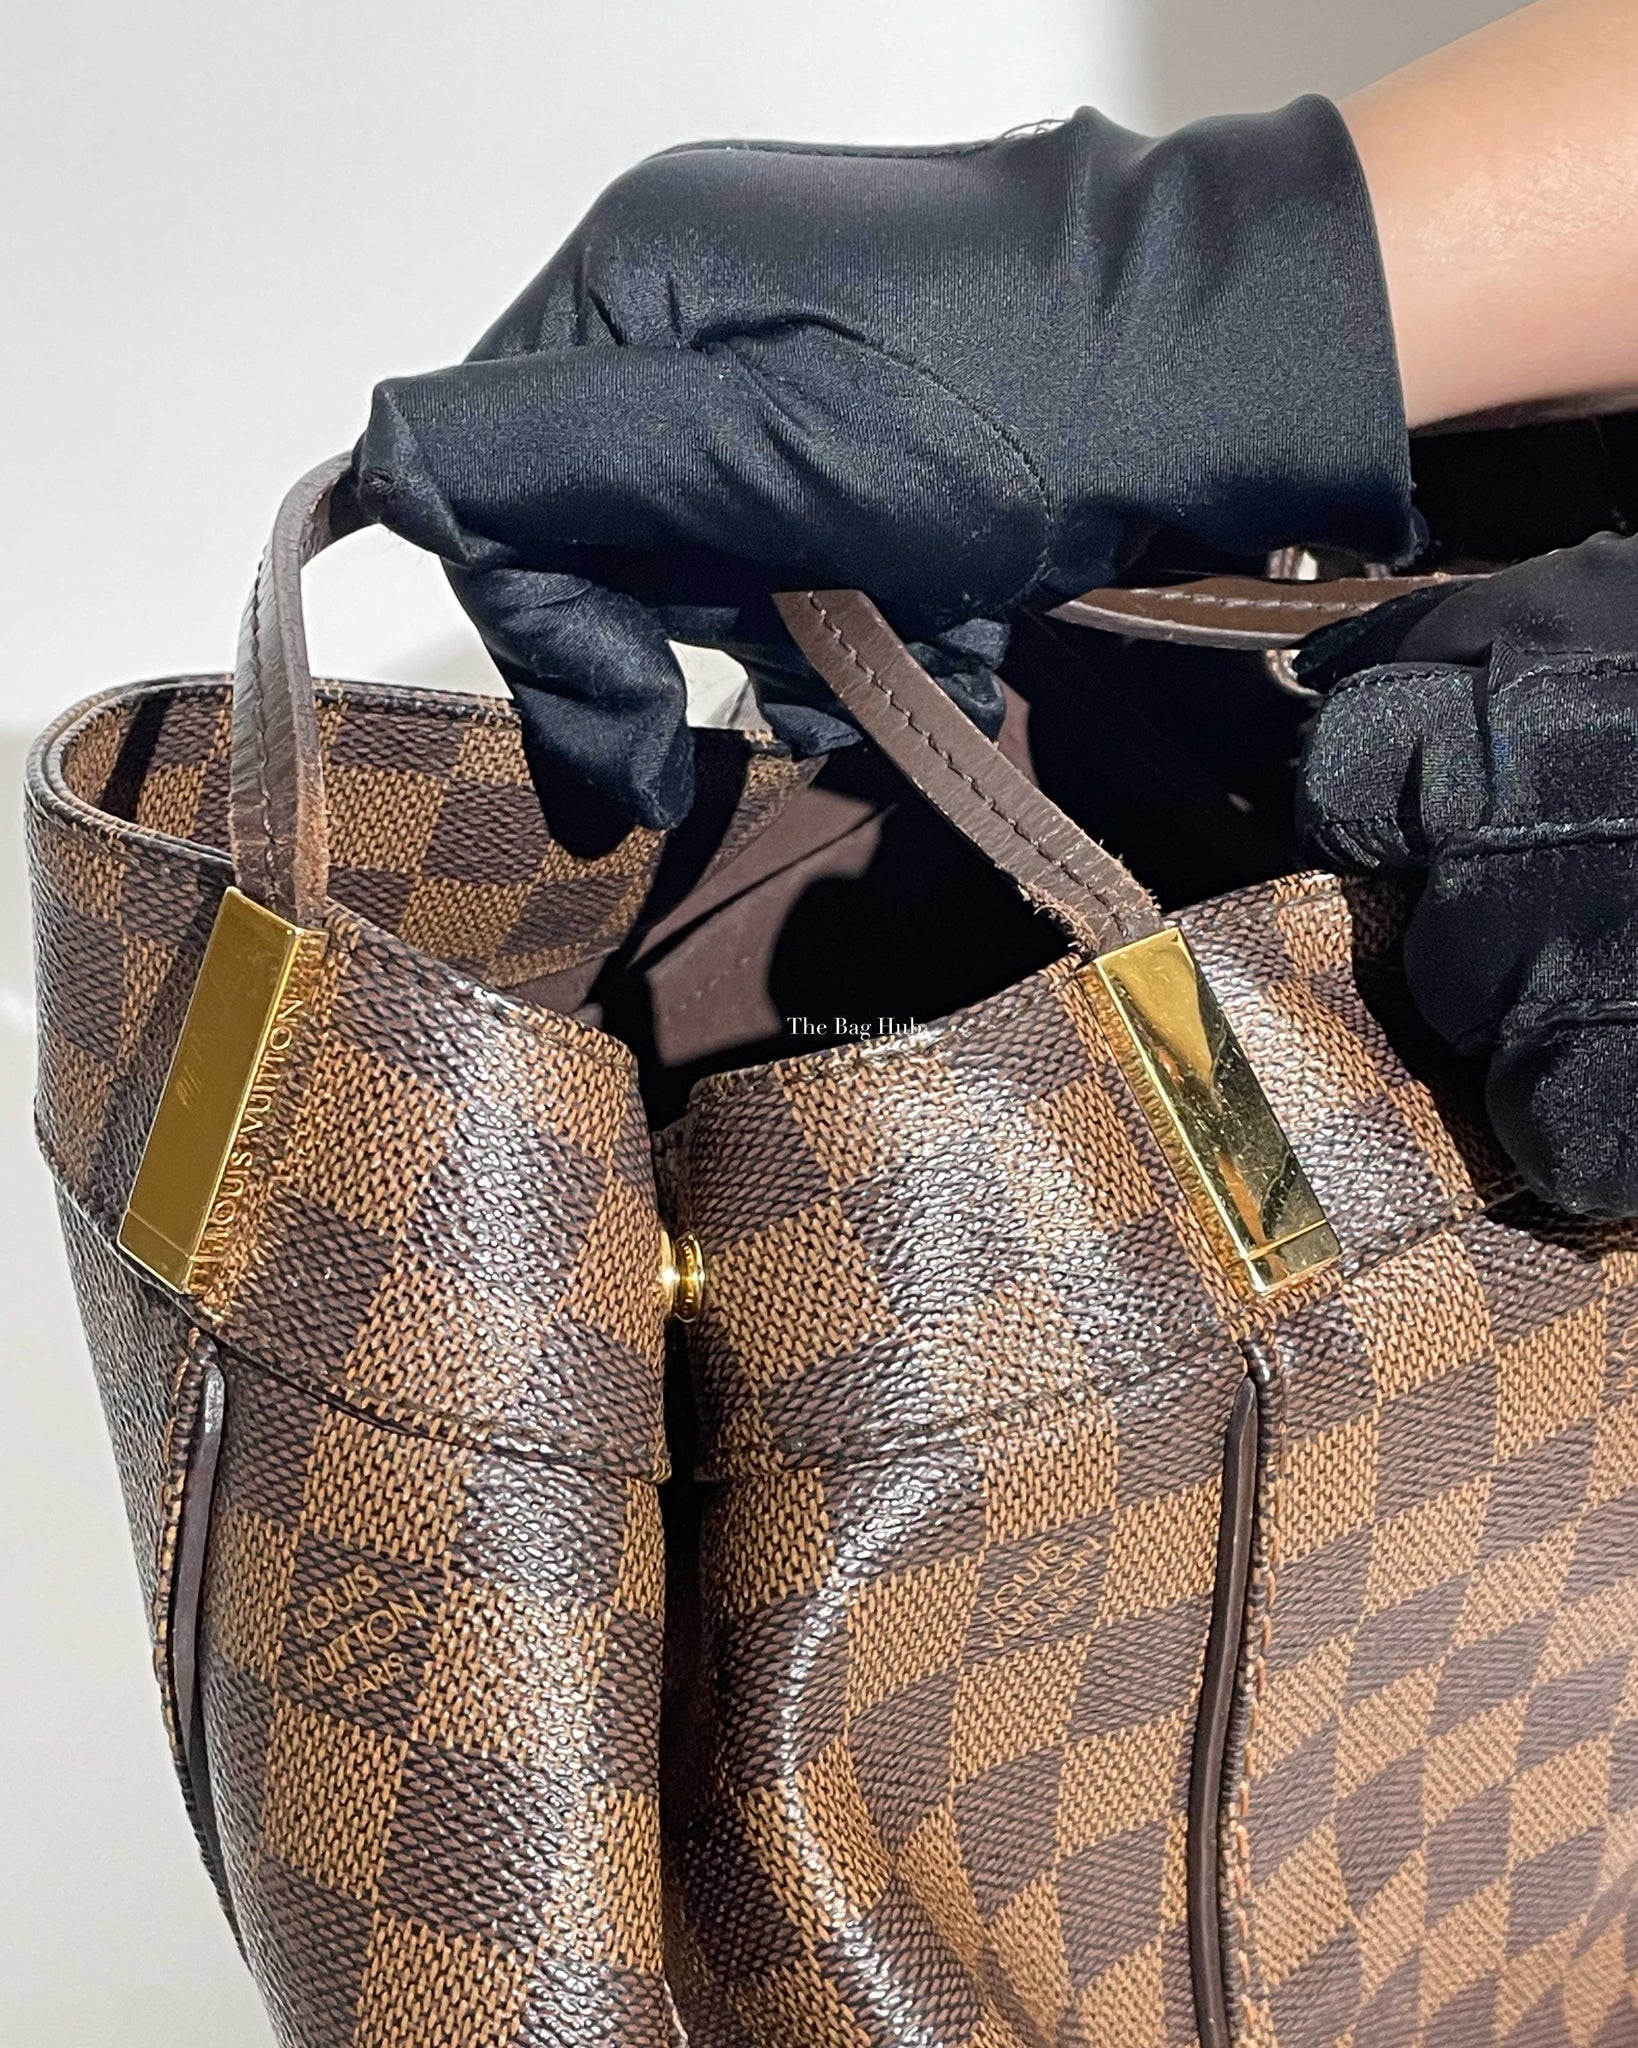 Louis Vuitton Damier Od√ on Tote mm, Black, One Size